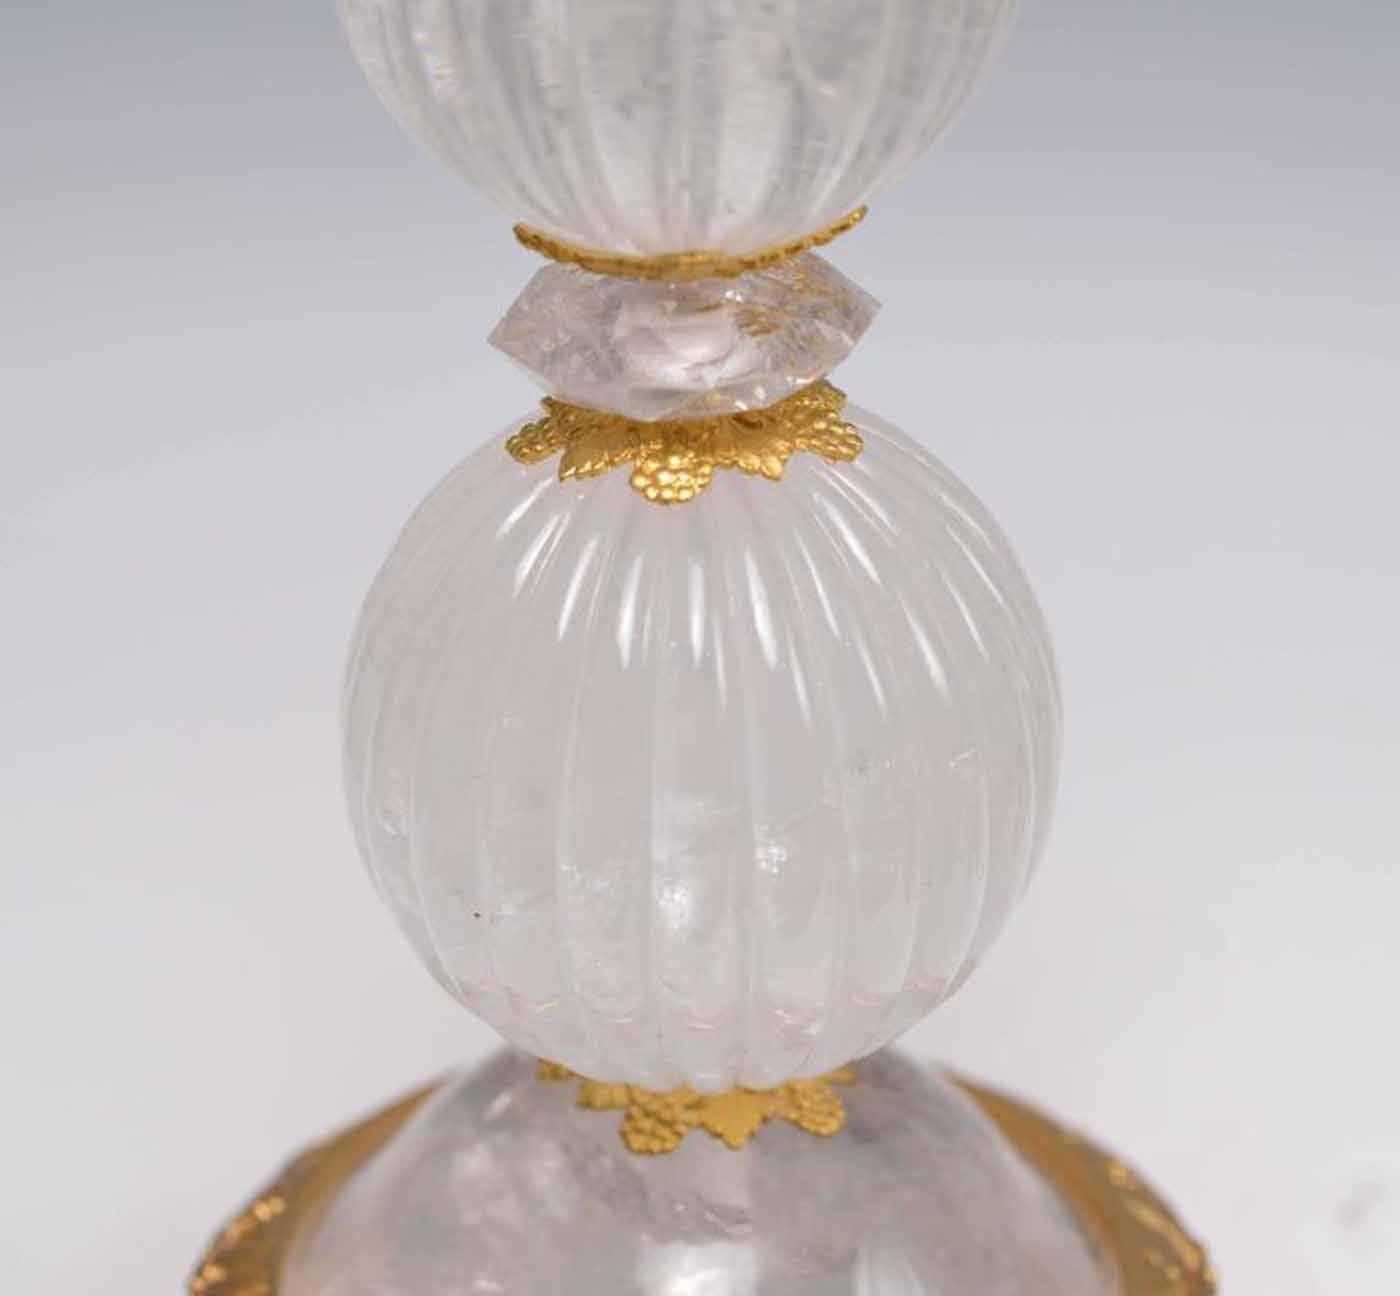 A pair of fine carved notch balls on fine cast polish brass base, created by Phoenix Gallery, NYC.
Available in nickel plating and antique brass finish. 
To the rock crystal: 17.5 in. H.
(Lampshade not included)